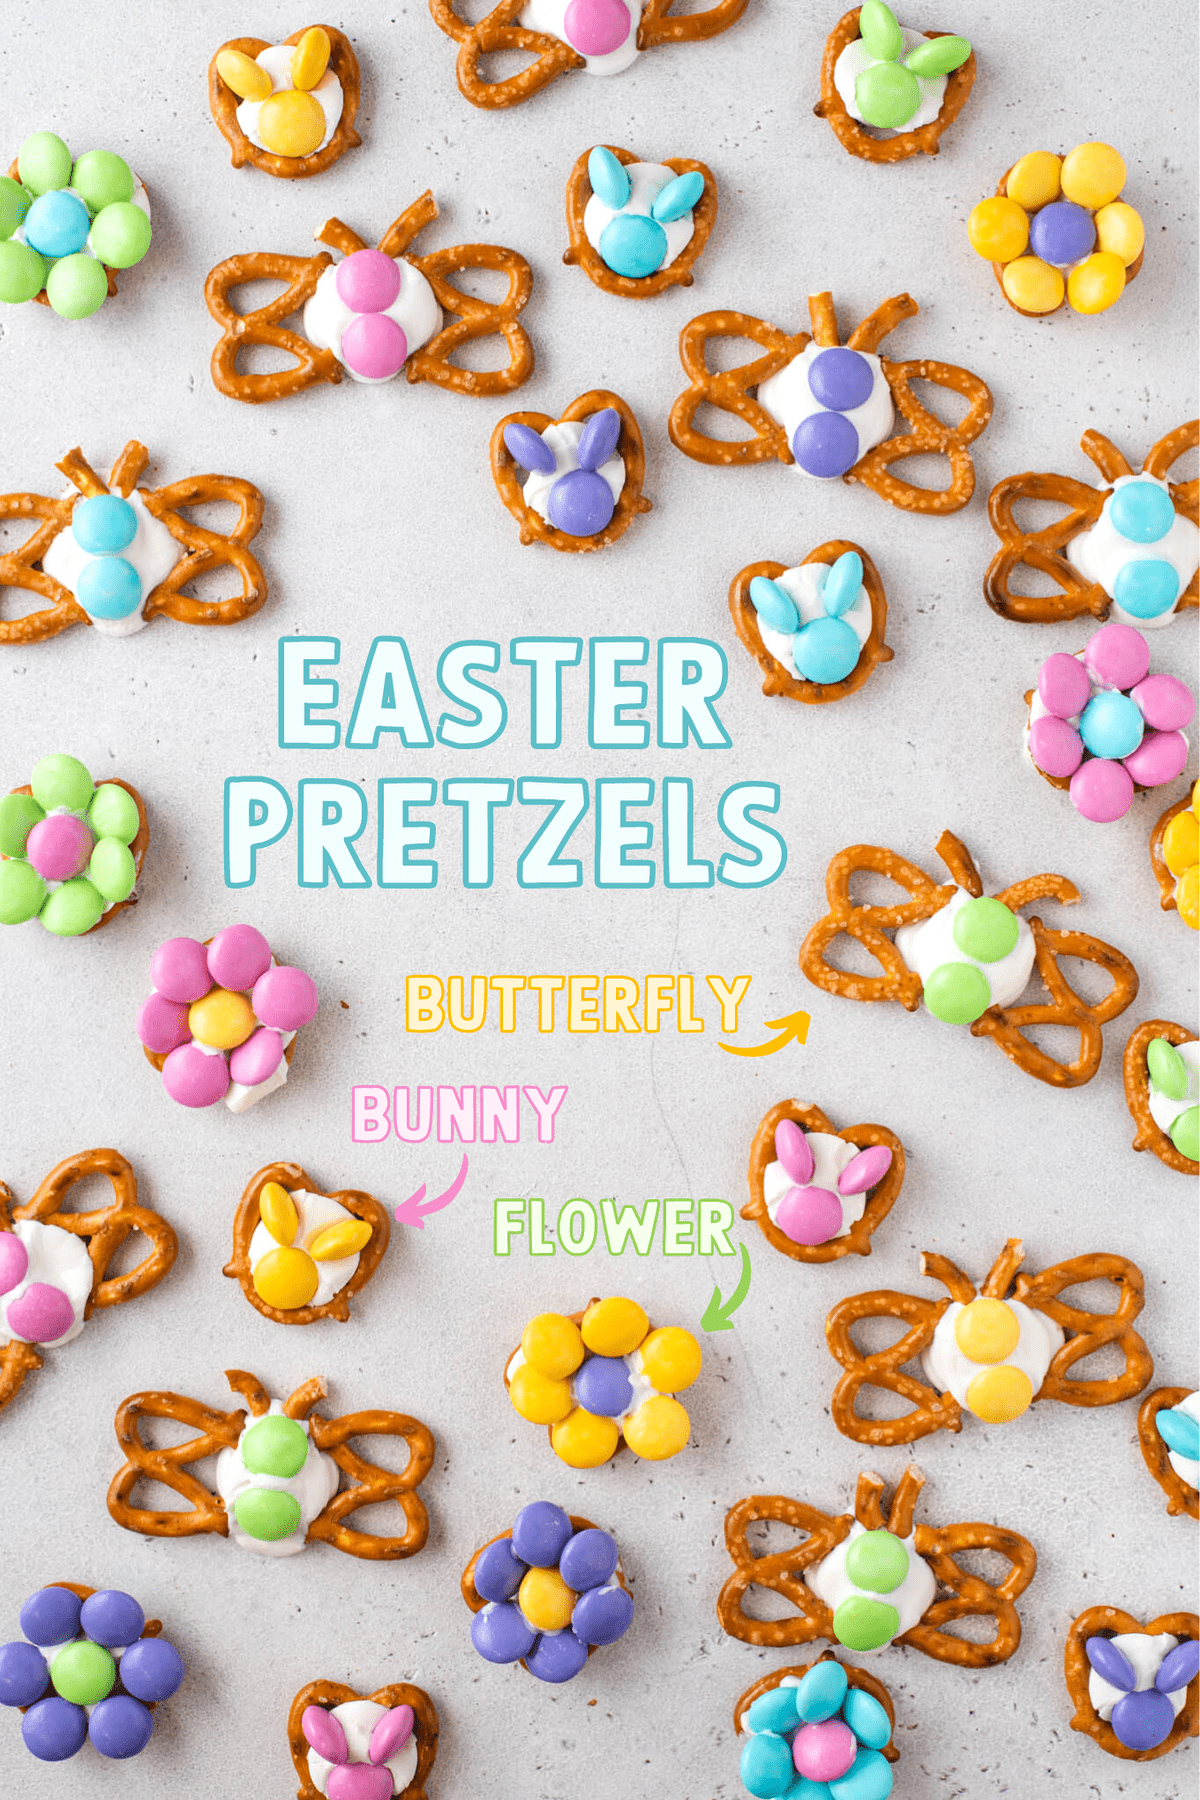 butterflies, bunnies and flowers made from pretzels, candy melts and m&ms arranged on gray background with text overlay